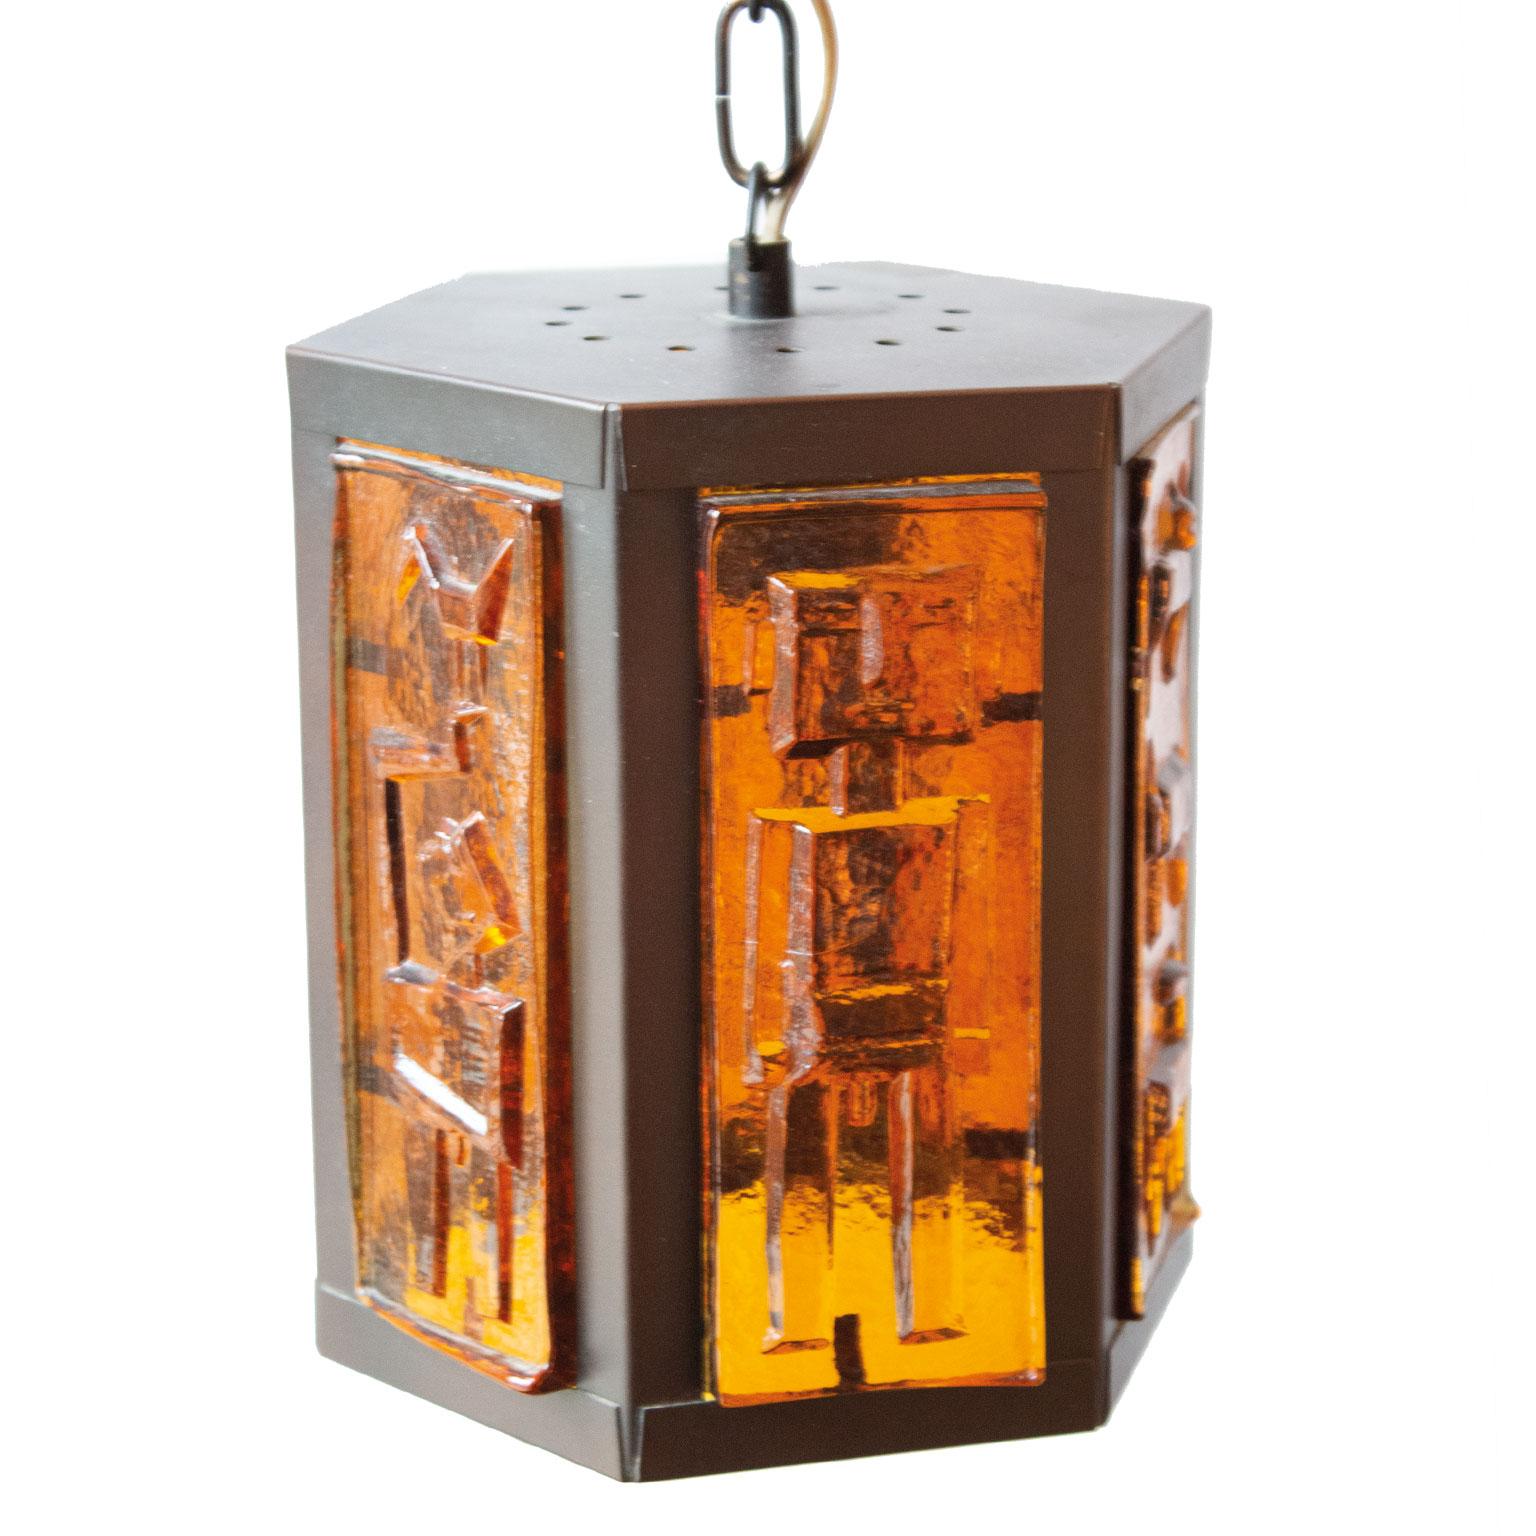 Swedish rustic colored glass pendant by Erik Höglund 1960s for Boda Bruk in Sweden. Material are metal with six thick cast brown glass slab walls with motives of paradise with Adam and Eva. Beautiful warm orange light when lit. Made in the 1960s.